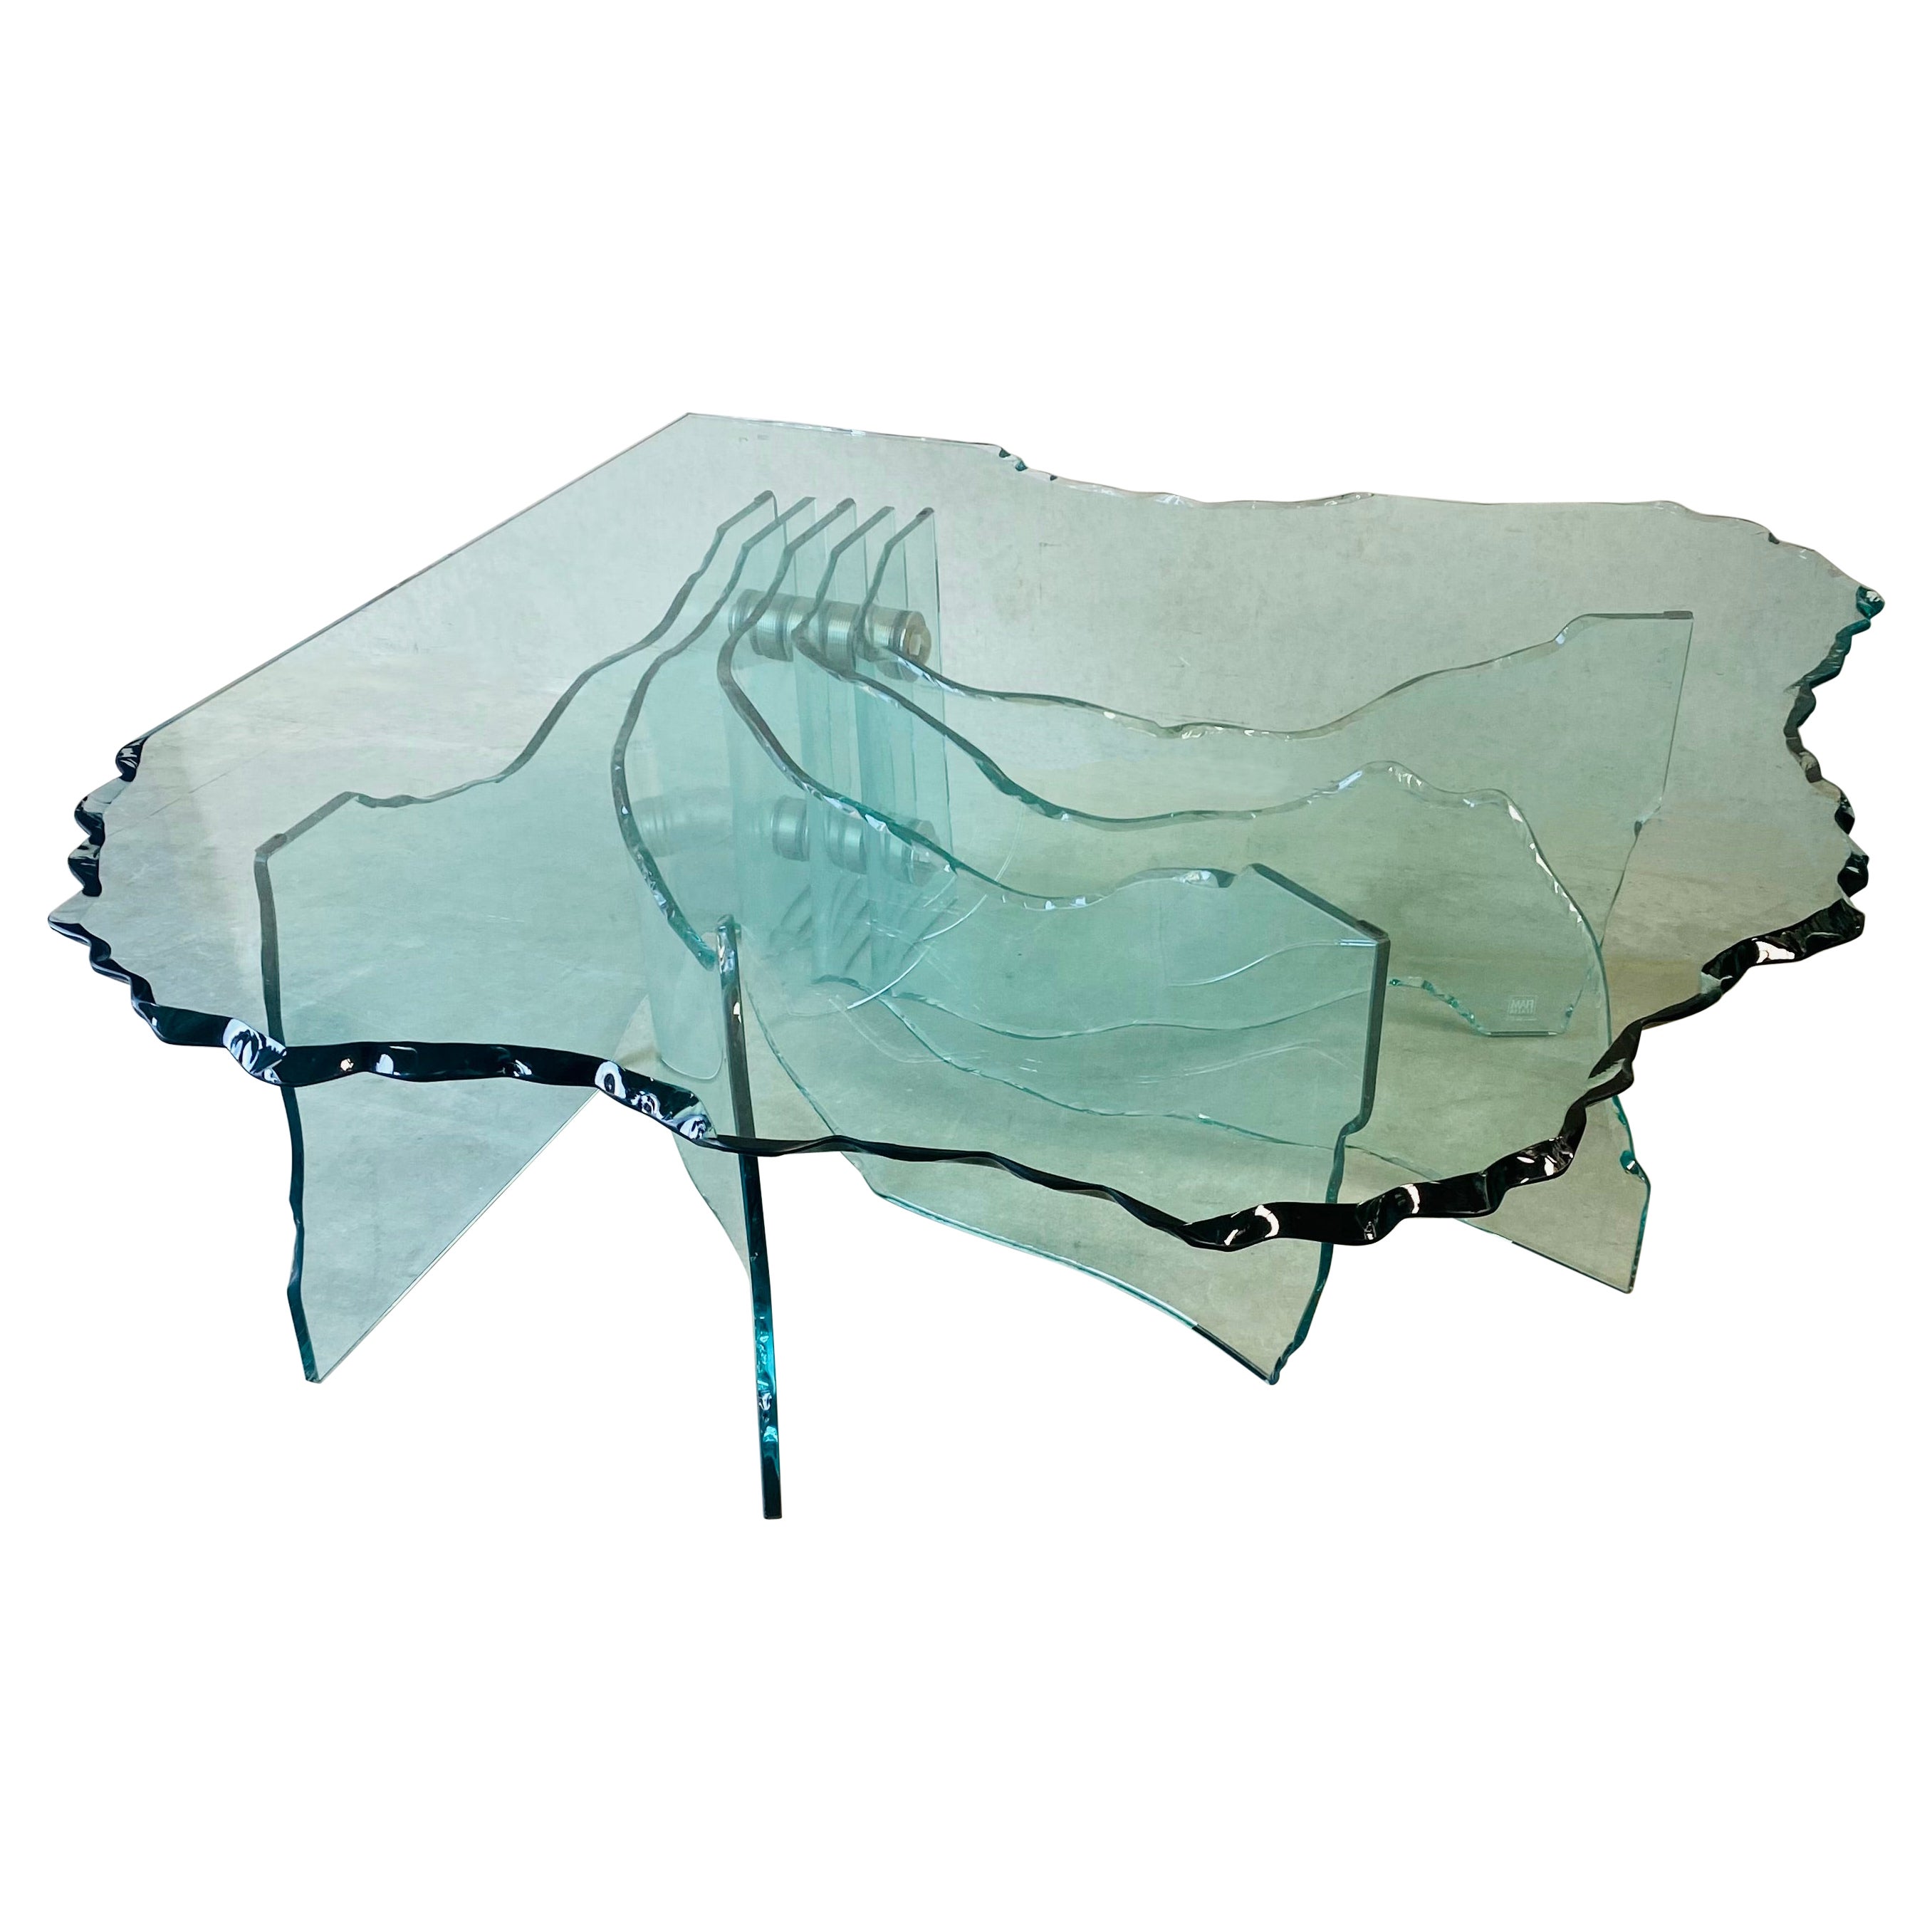 Fiam Italia Sculptural Hand Carved Glass Coffee Table by Danny Lane, Italy 1980